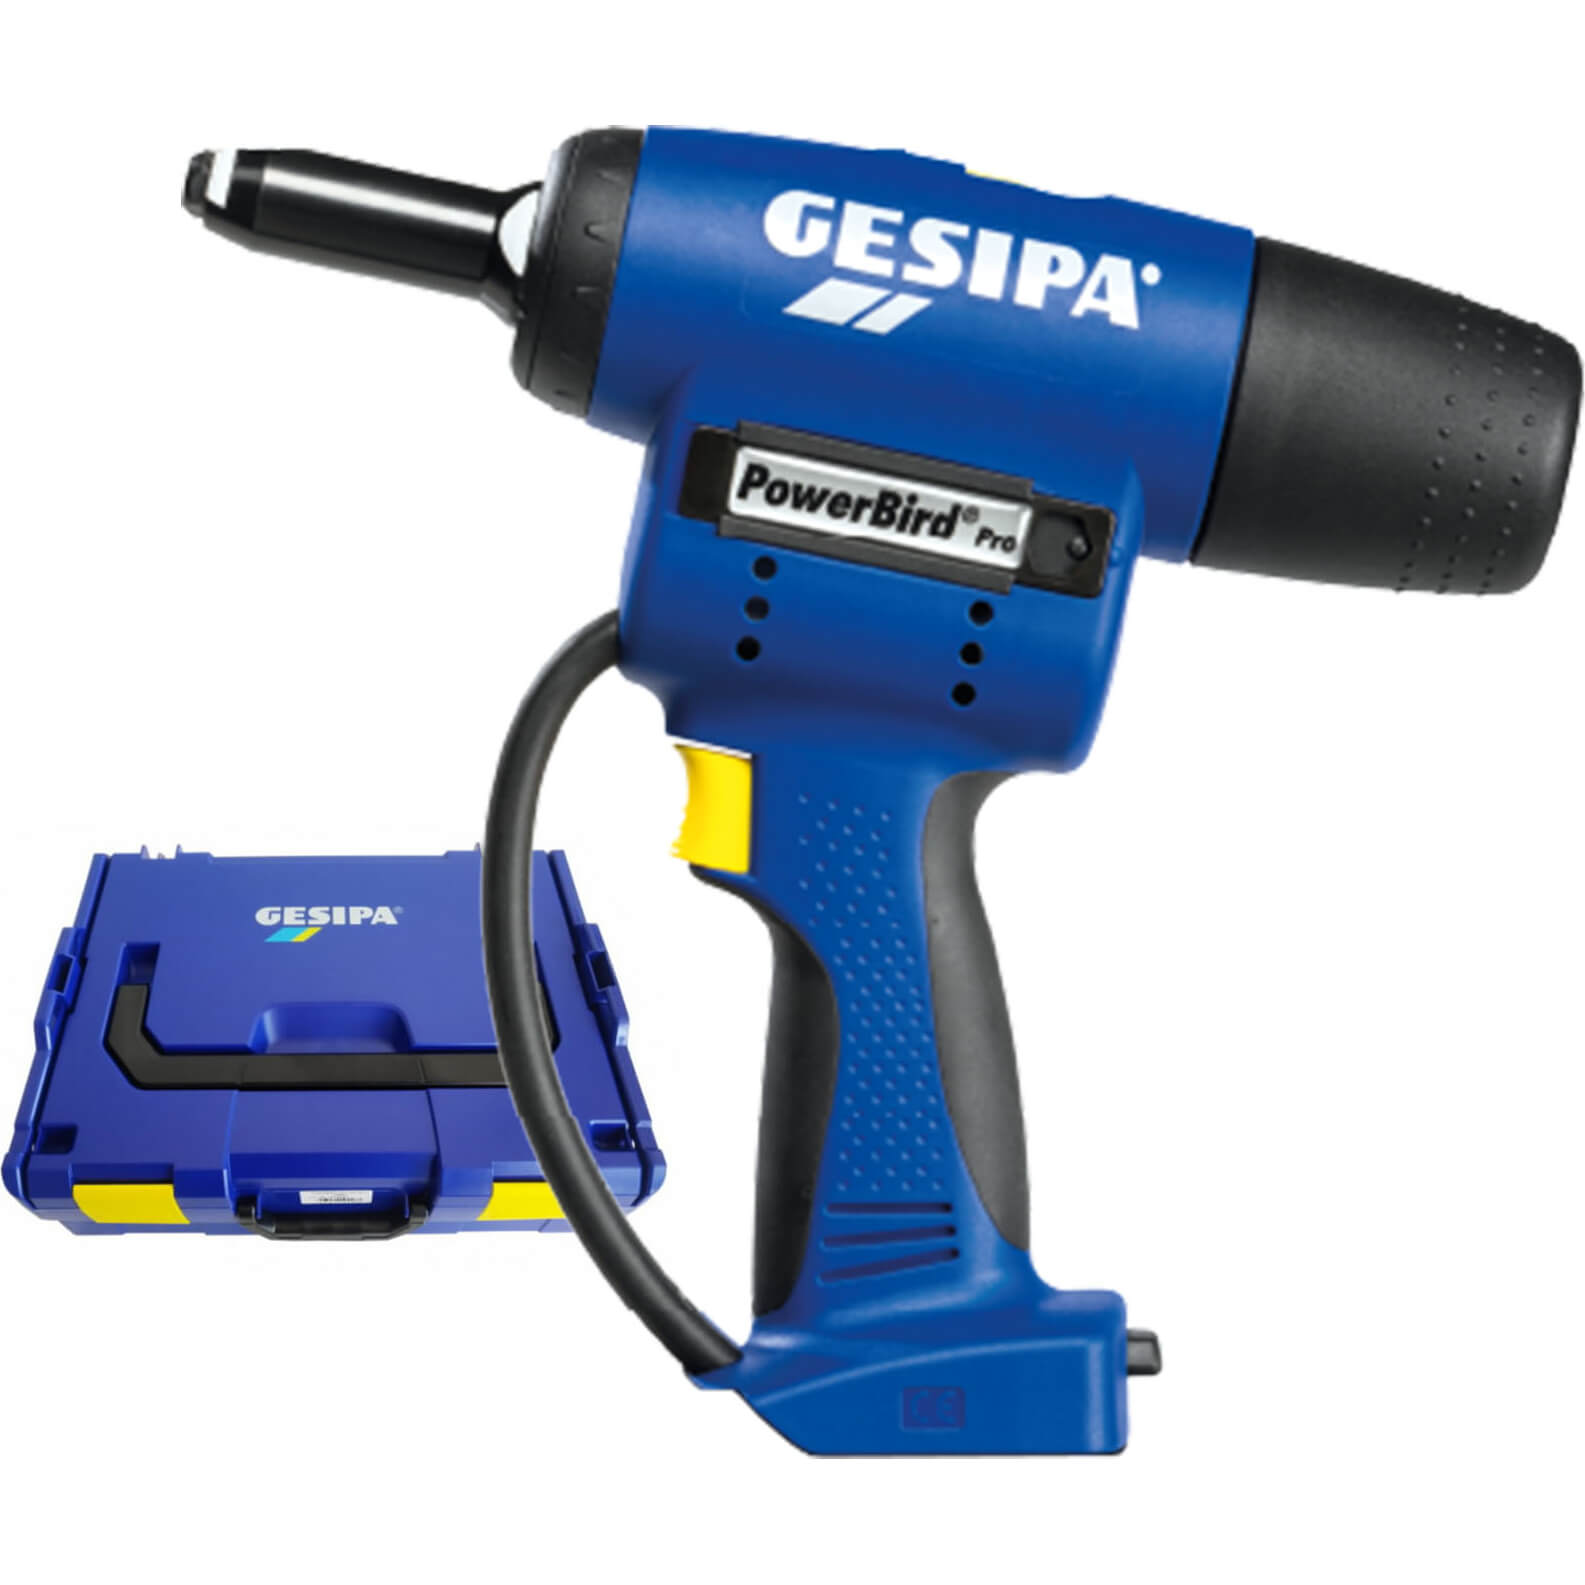 Image of Gesipa PowerBird Pro Gold Edition Cordless Riveter No Batteries No Charger Case